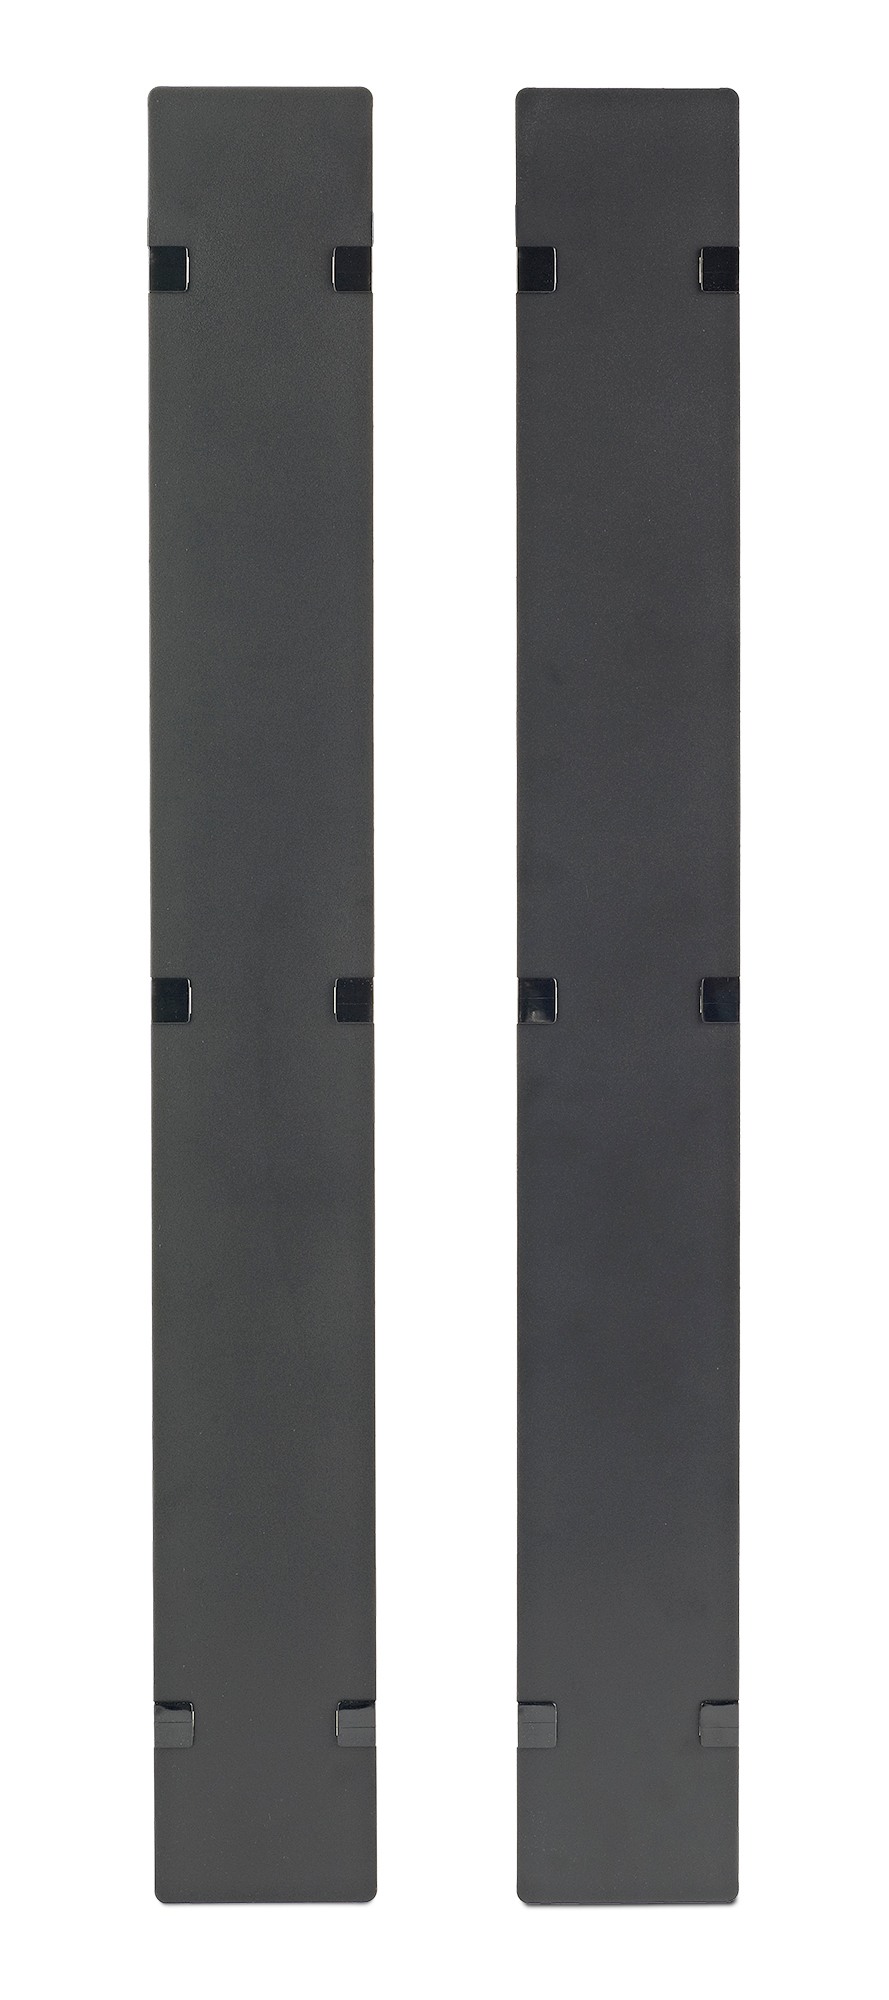 Hinged Covers for NetShelter SX 750mm Wide 45U Vertical Cable Manager